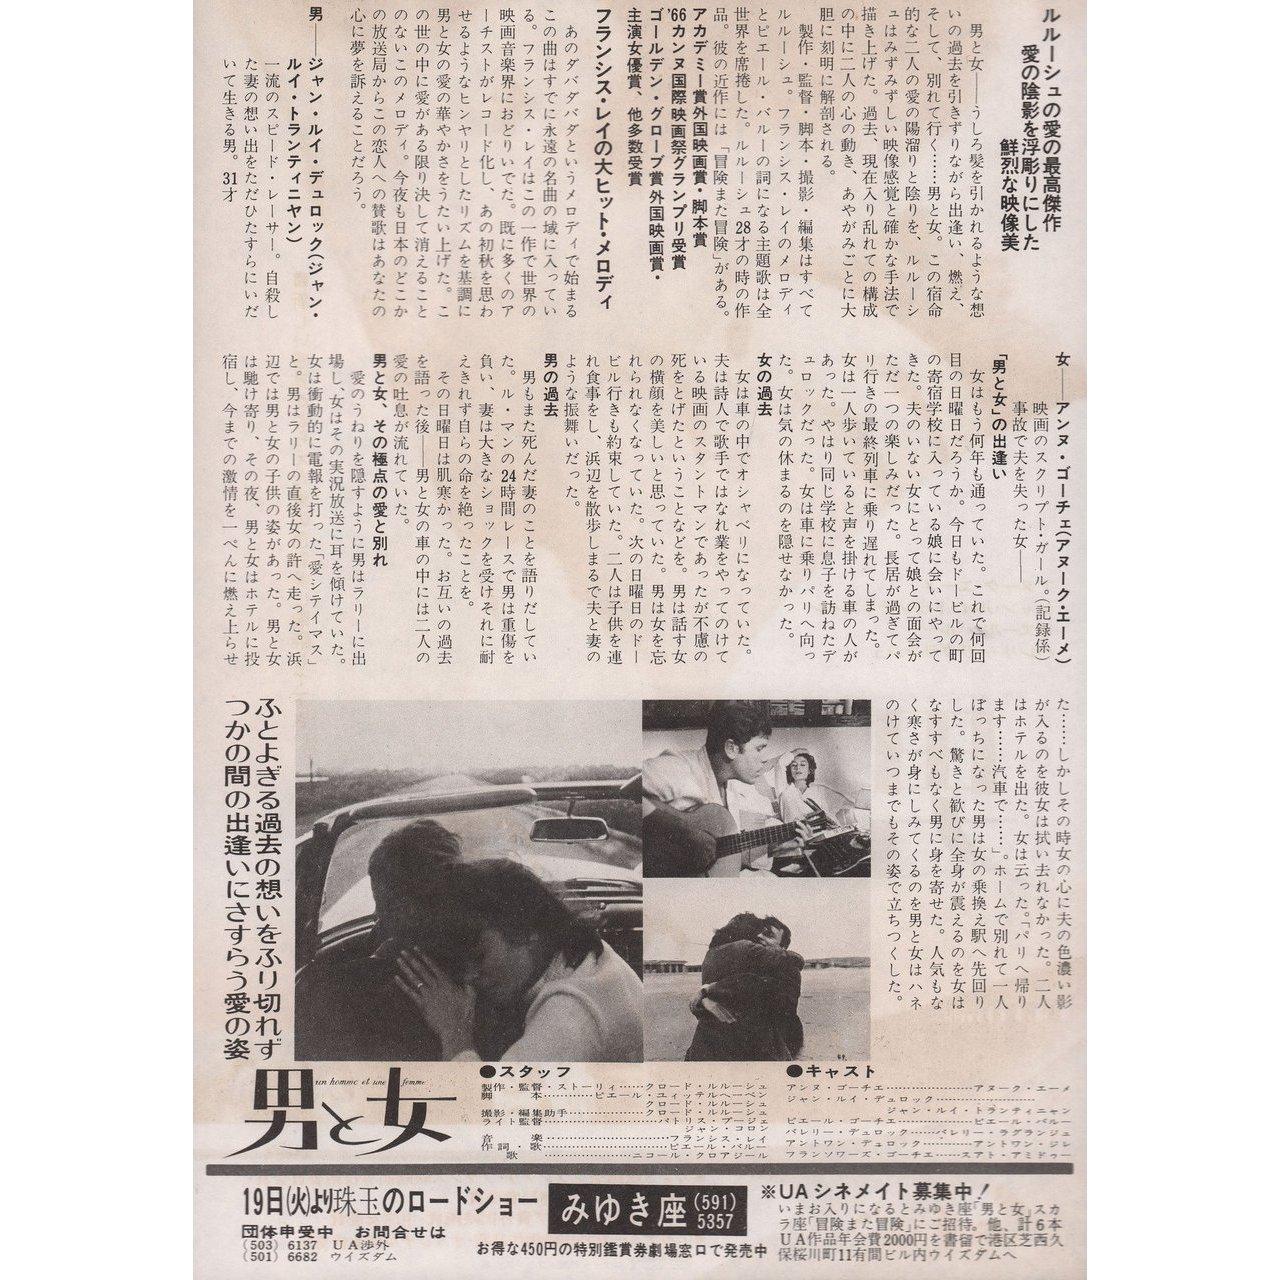 Original 1972 re-release Japanese B5 chirashi flyer for the 1966 film A Man and a Woman (Un homme et une femme) directed by Claude Lelouch with Anouk Aimee / Jean-Louis Trintignant / Pierre Barouh / Valerie Lagrange. Fine condition, rolled. Please